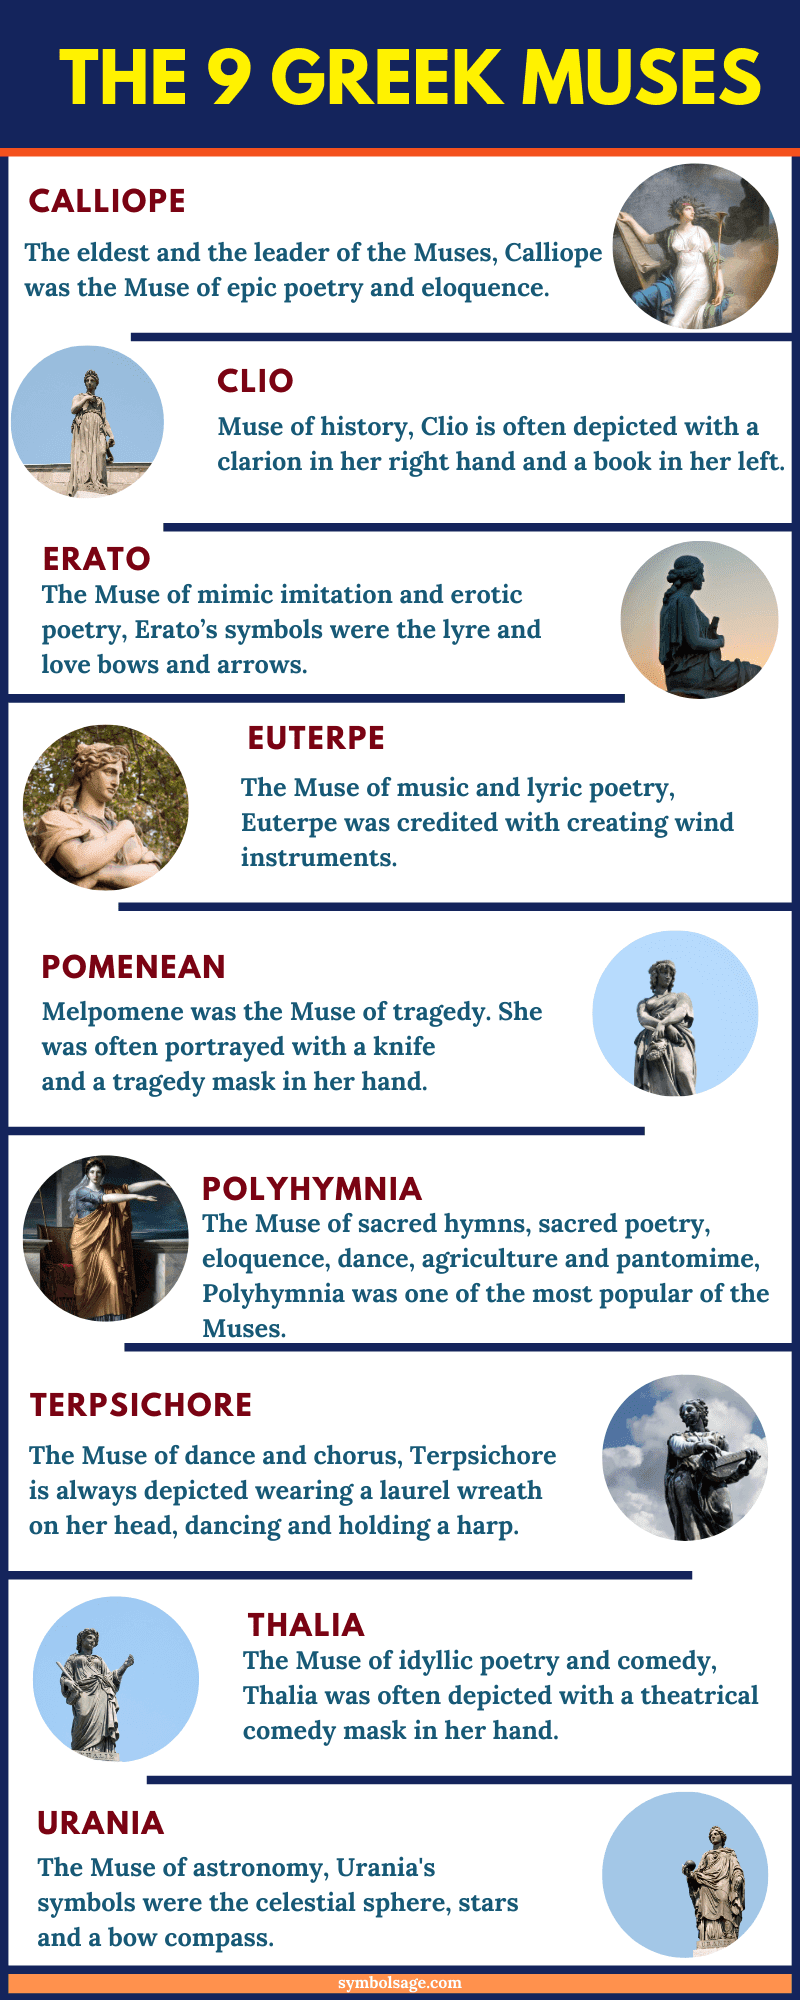 Nine younger Greek muses